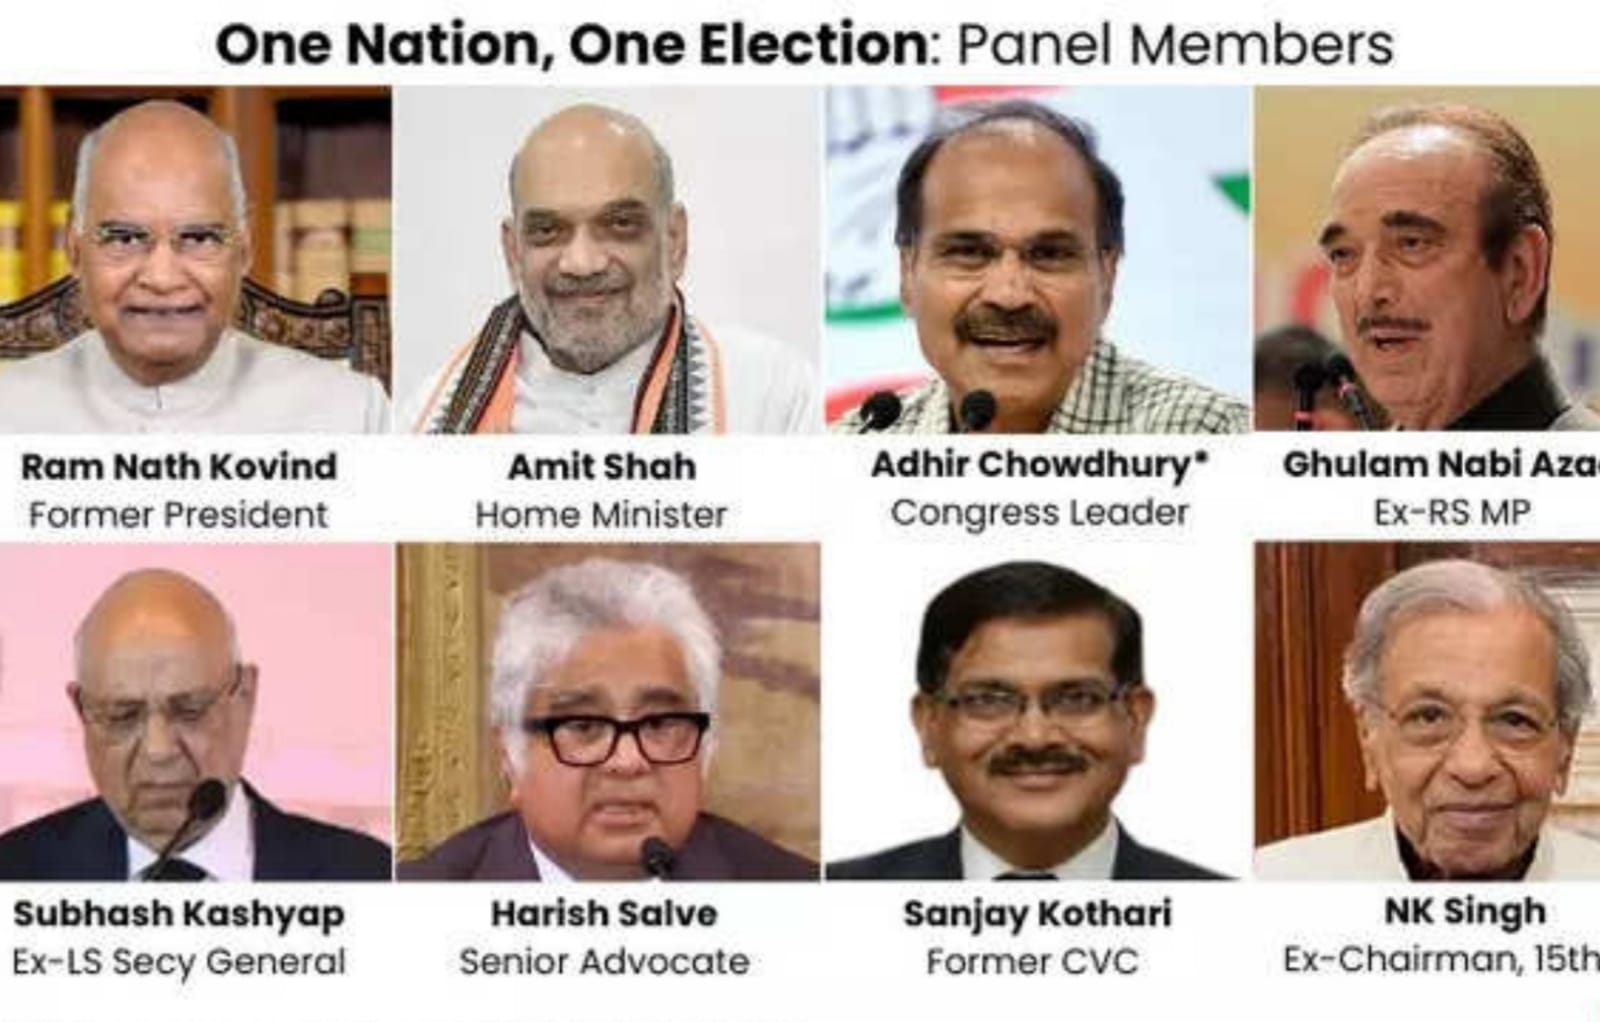 One Nation One Election